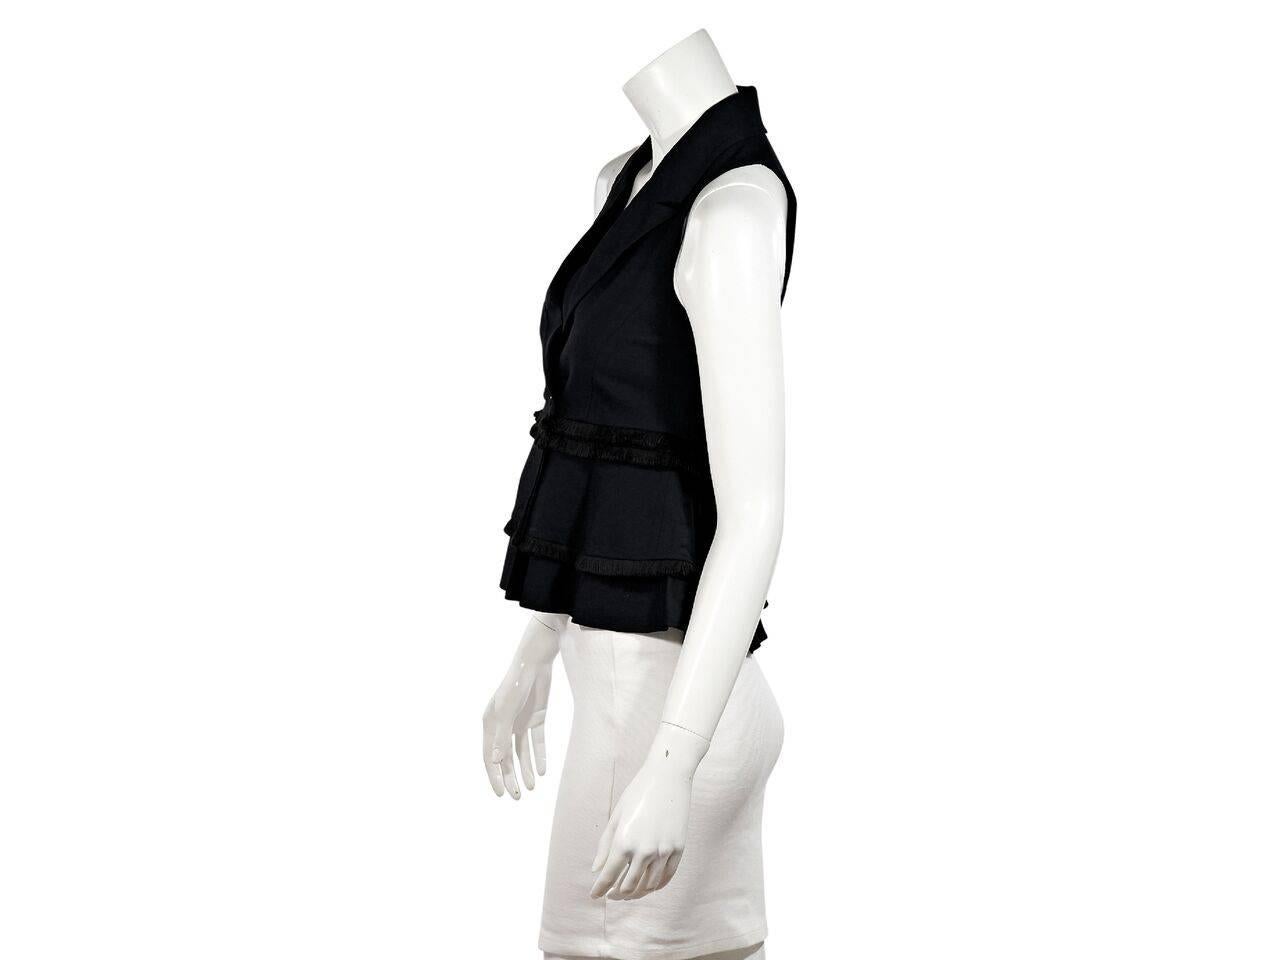 Product details:  Black fringe-trim crepe vest top by Marissa Webb.  V-neck.  Sleeveless.  Double-breasted button-front closure.  
Condition: Pre-owned. New with tags.
Est. Retail $ 428.00